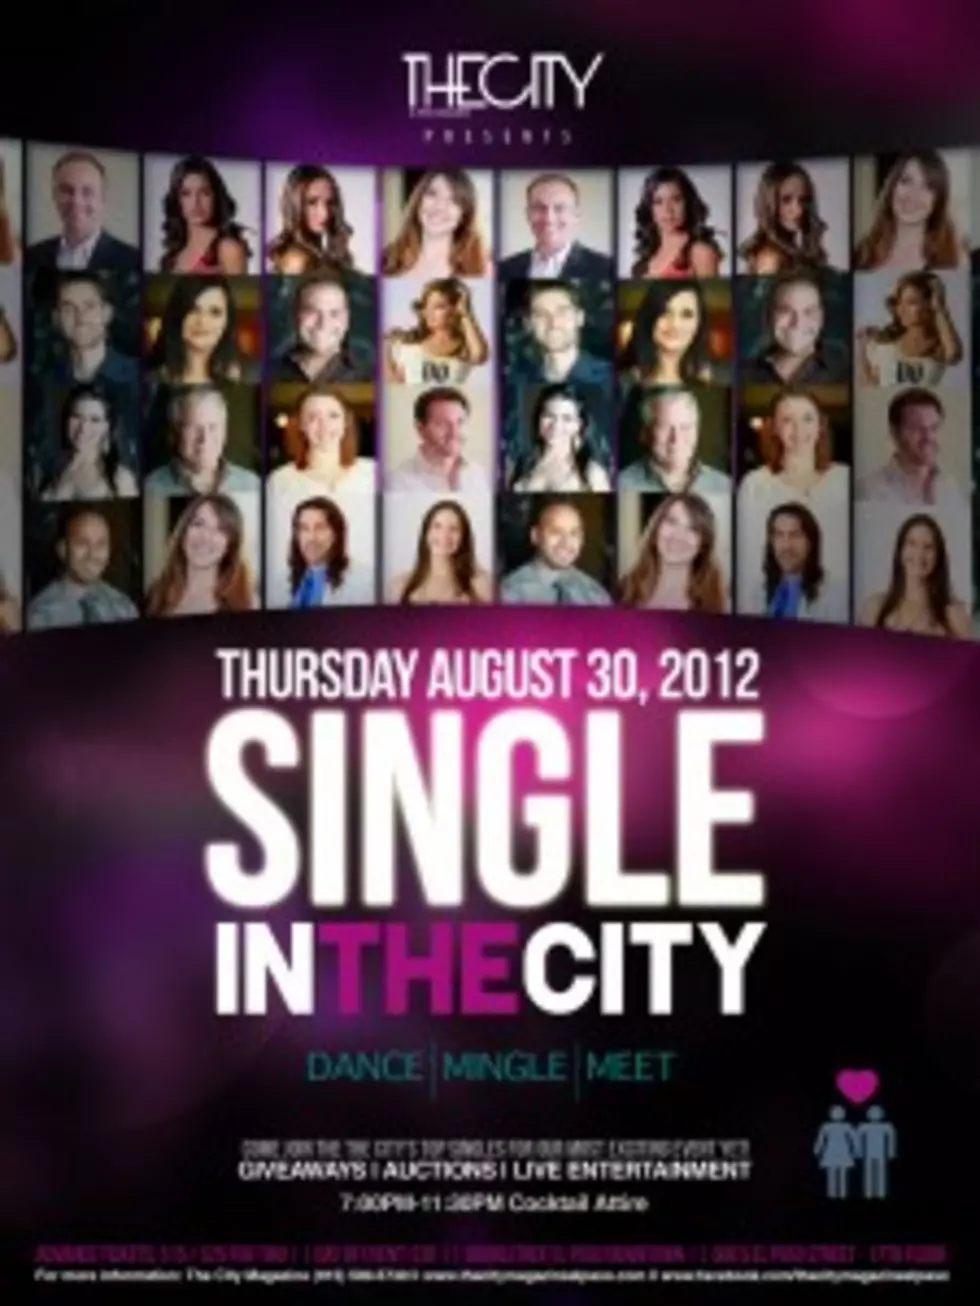 Are You Single In The City? The City Magazine Presents &#8216;Single In The City&#8217; Tonight